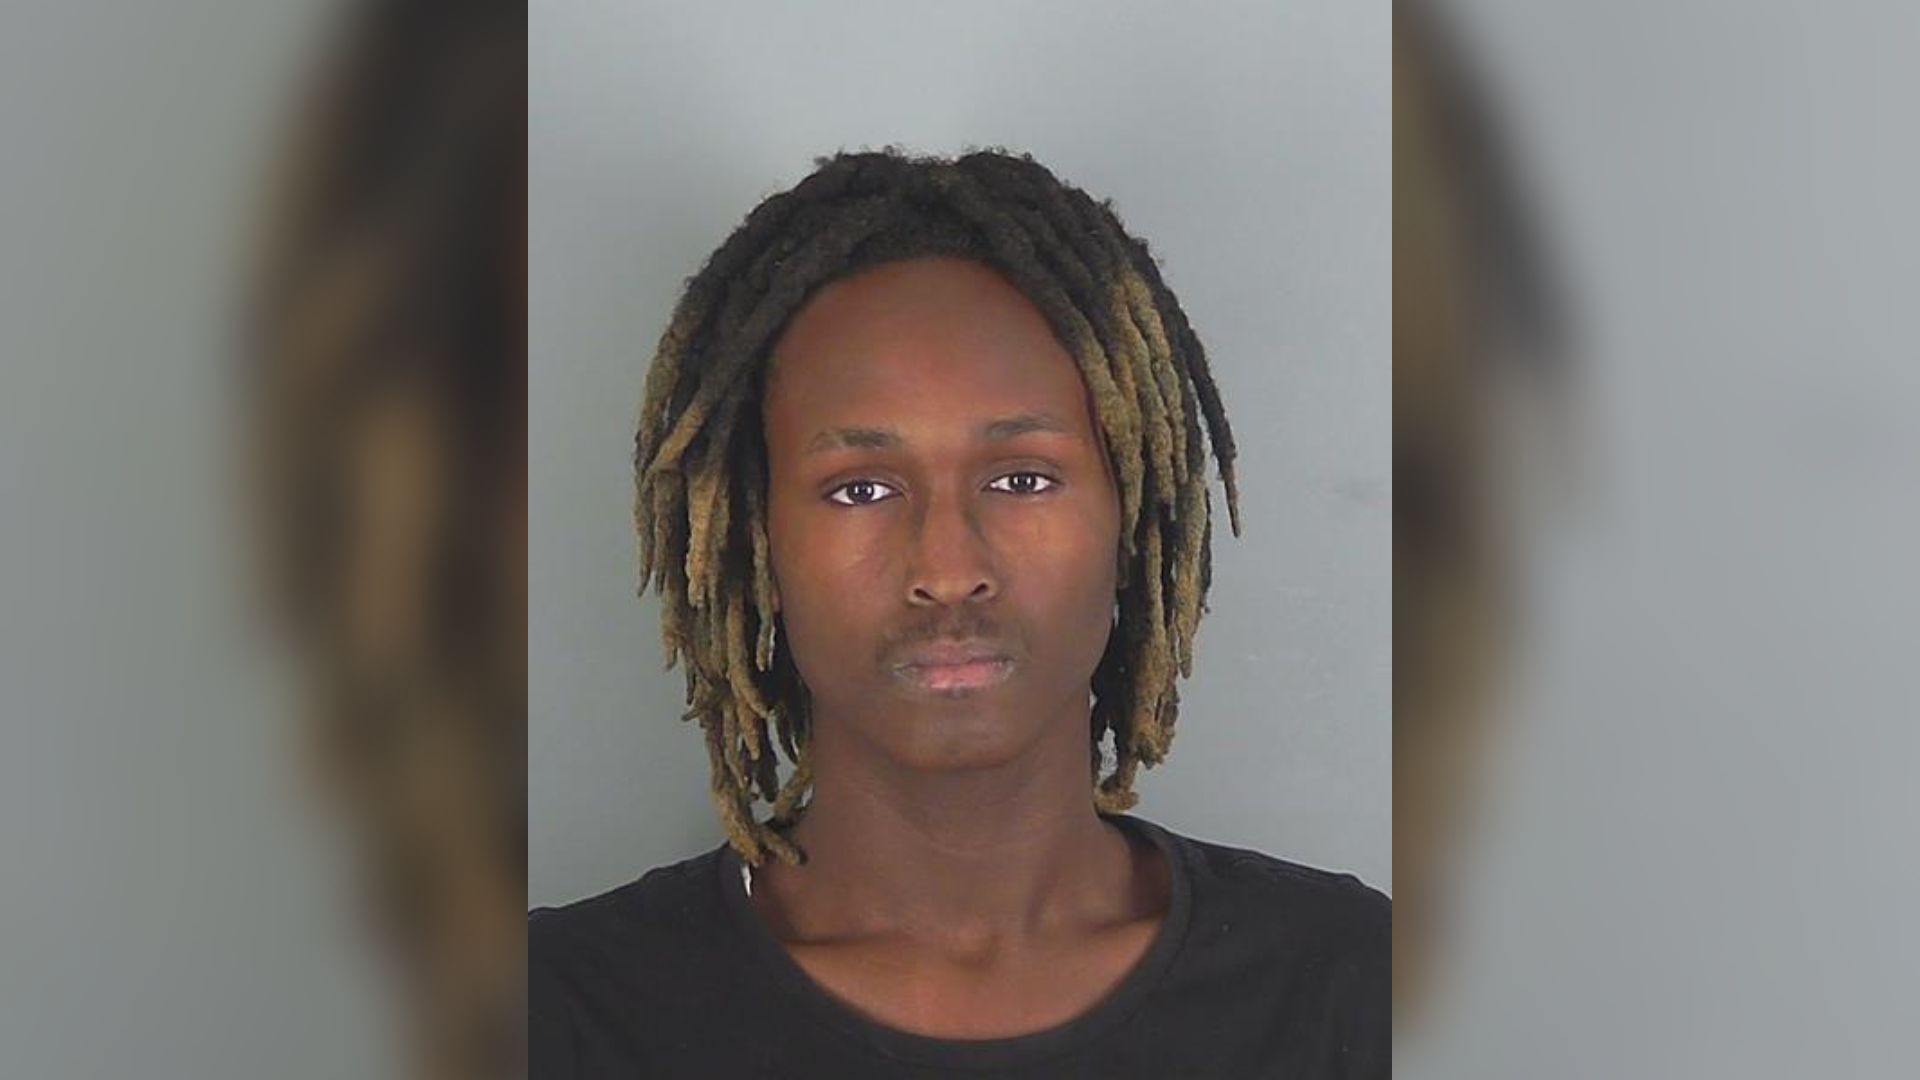 Sexxx13 - 18-year-old arrested on 13 child sex crimes in Spartanburg, deputies say